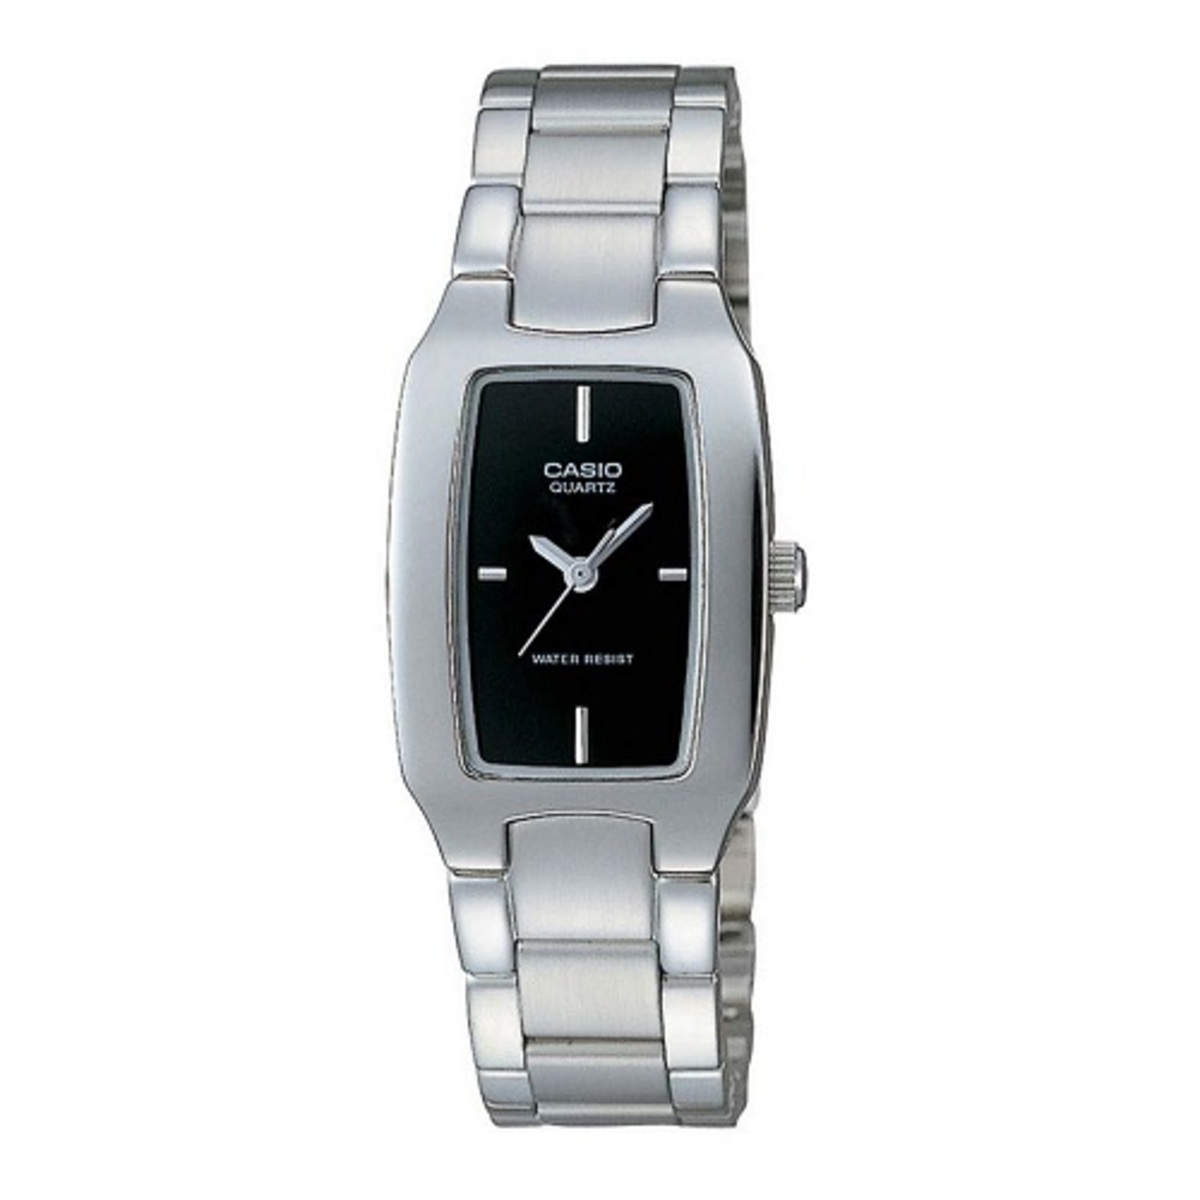 Casio Enticer Black Dial Women's Watch -A1785 – The Watch Factory ®